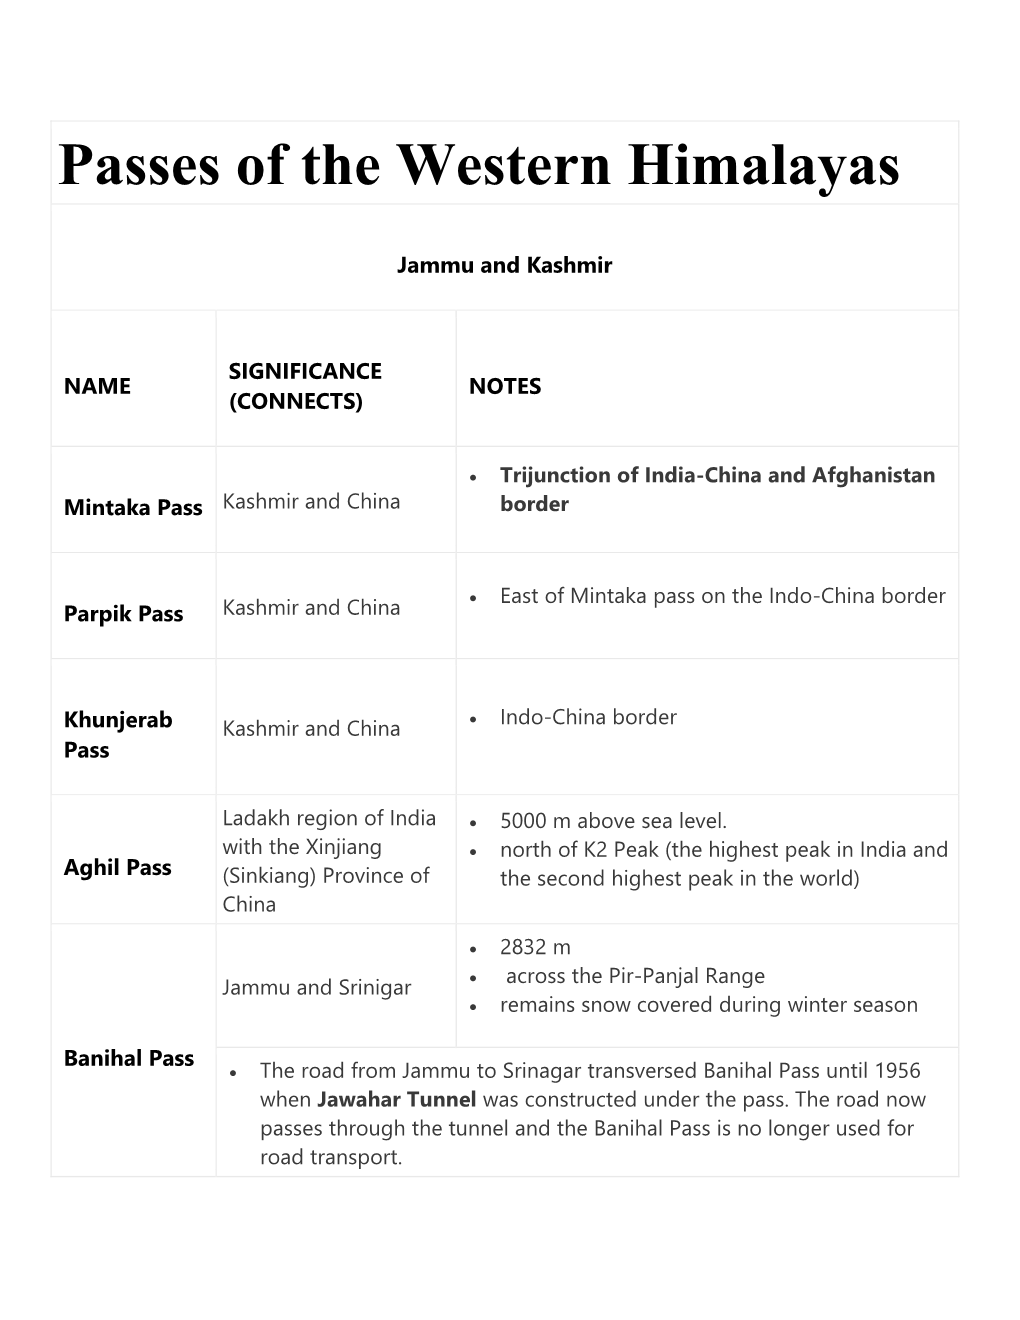 Passes of the Western Himalayas